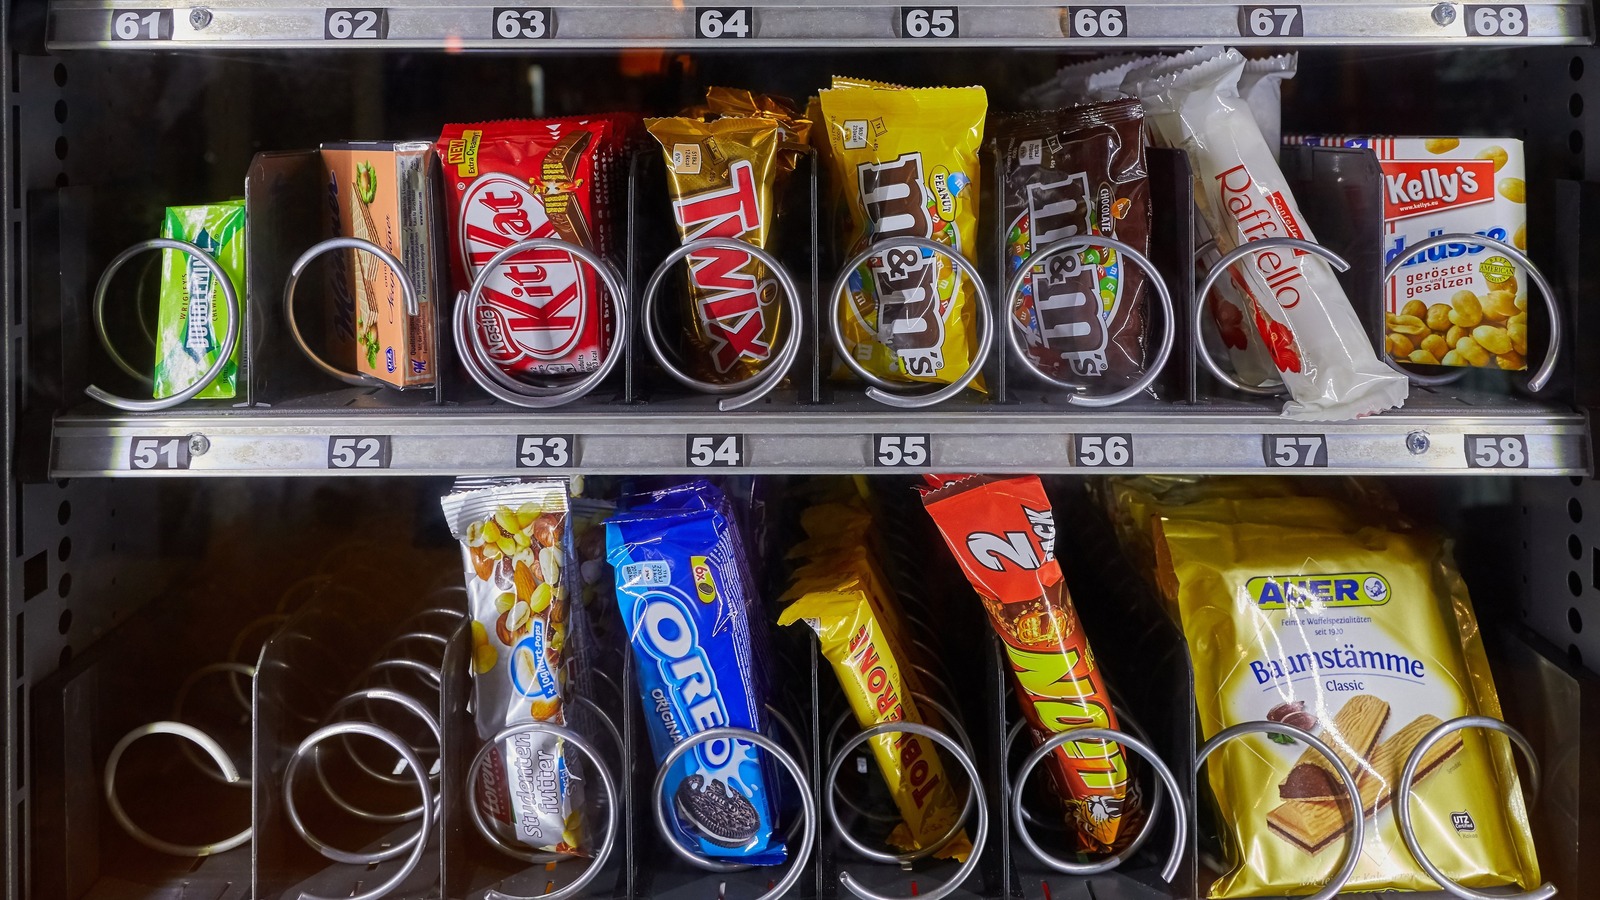 What is a vending machine?